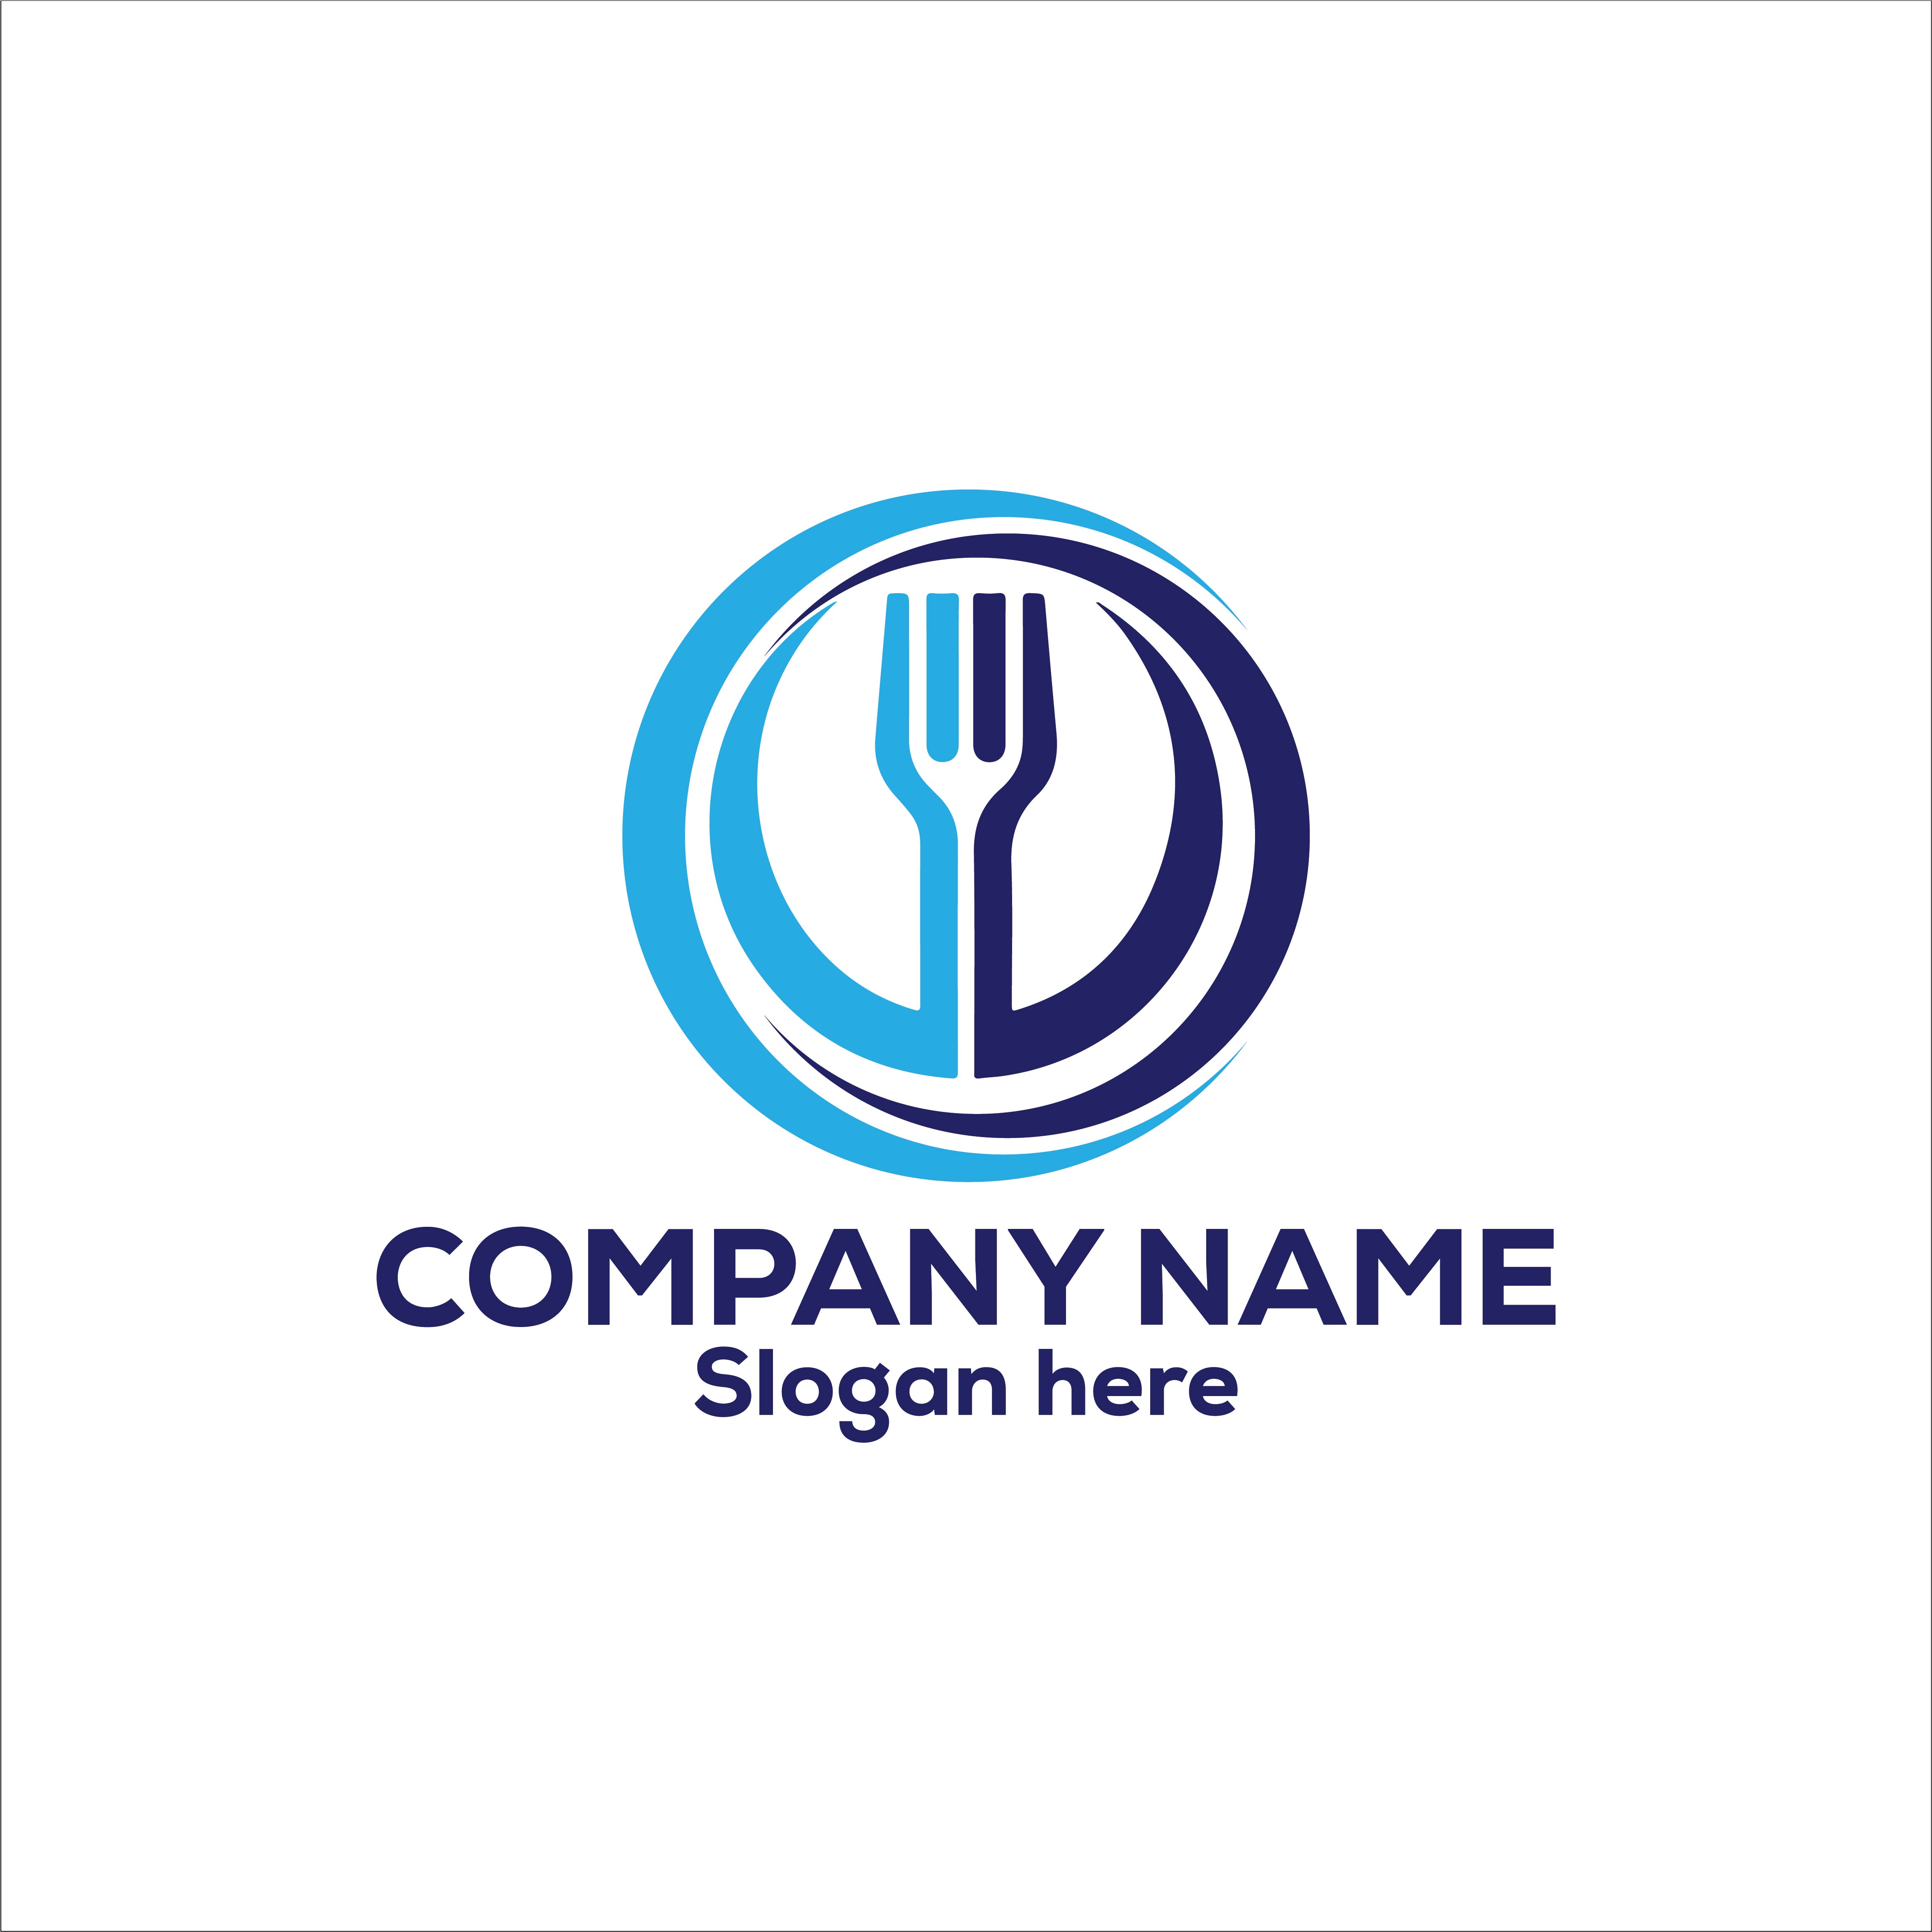 Restaurant Logo or Icon Design Vector Image Template cover image.